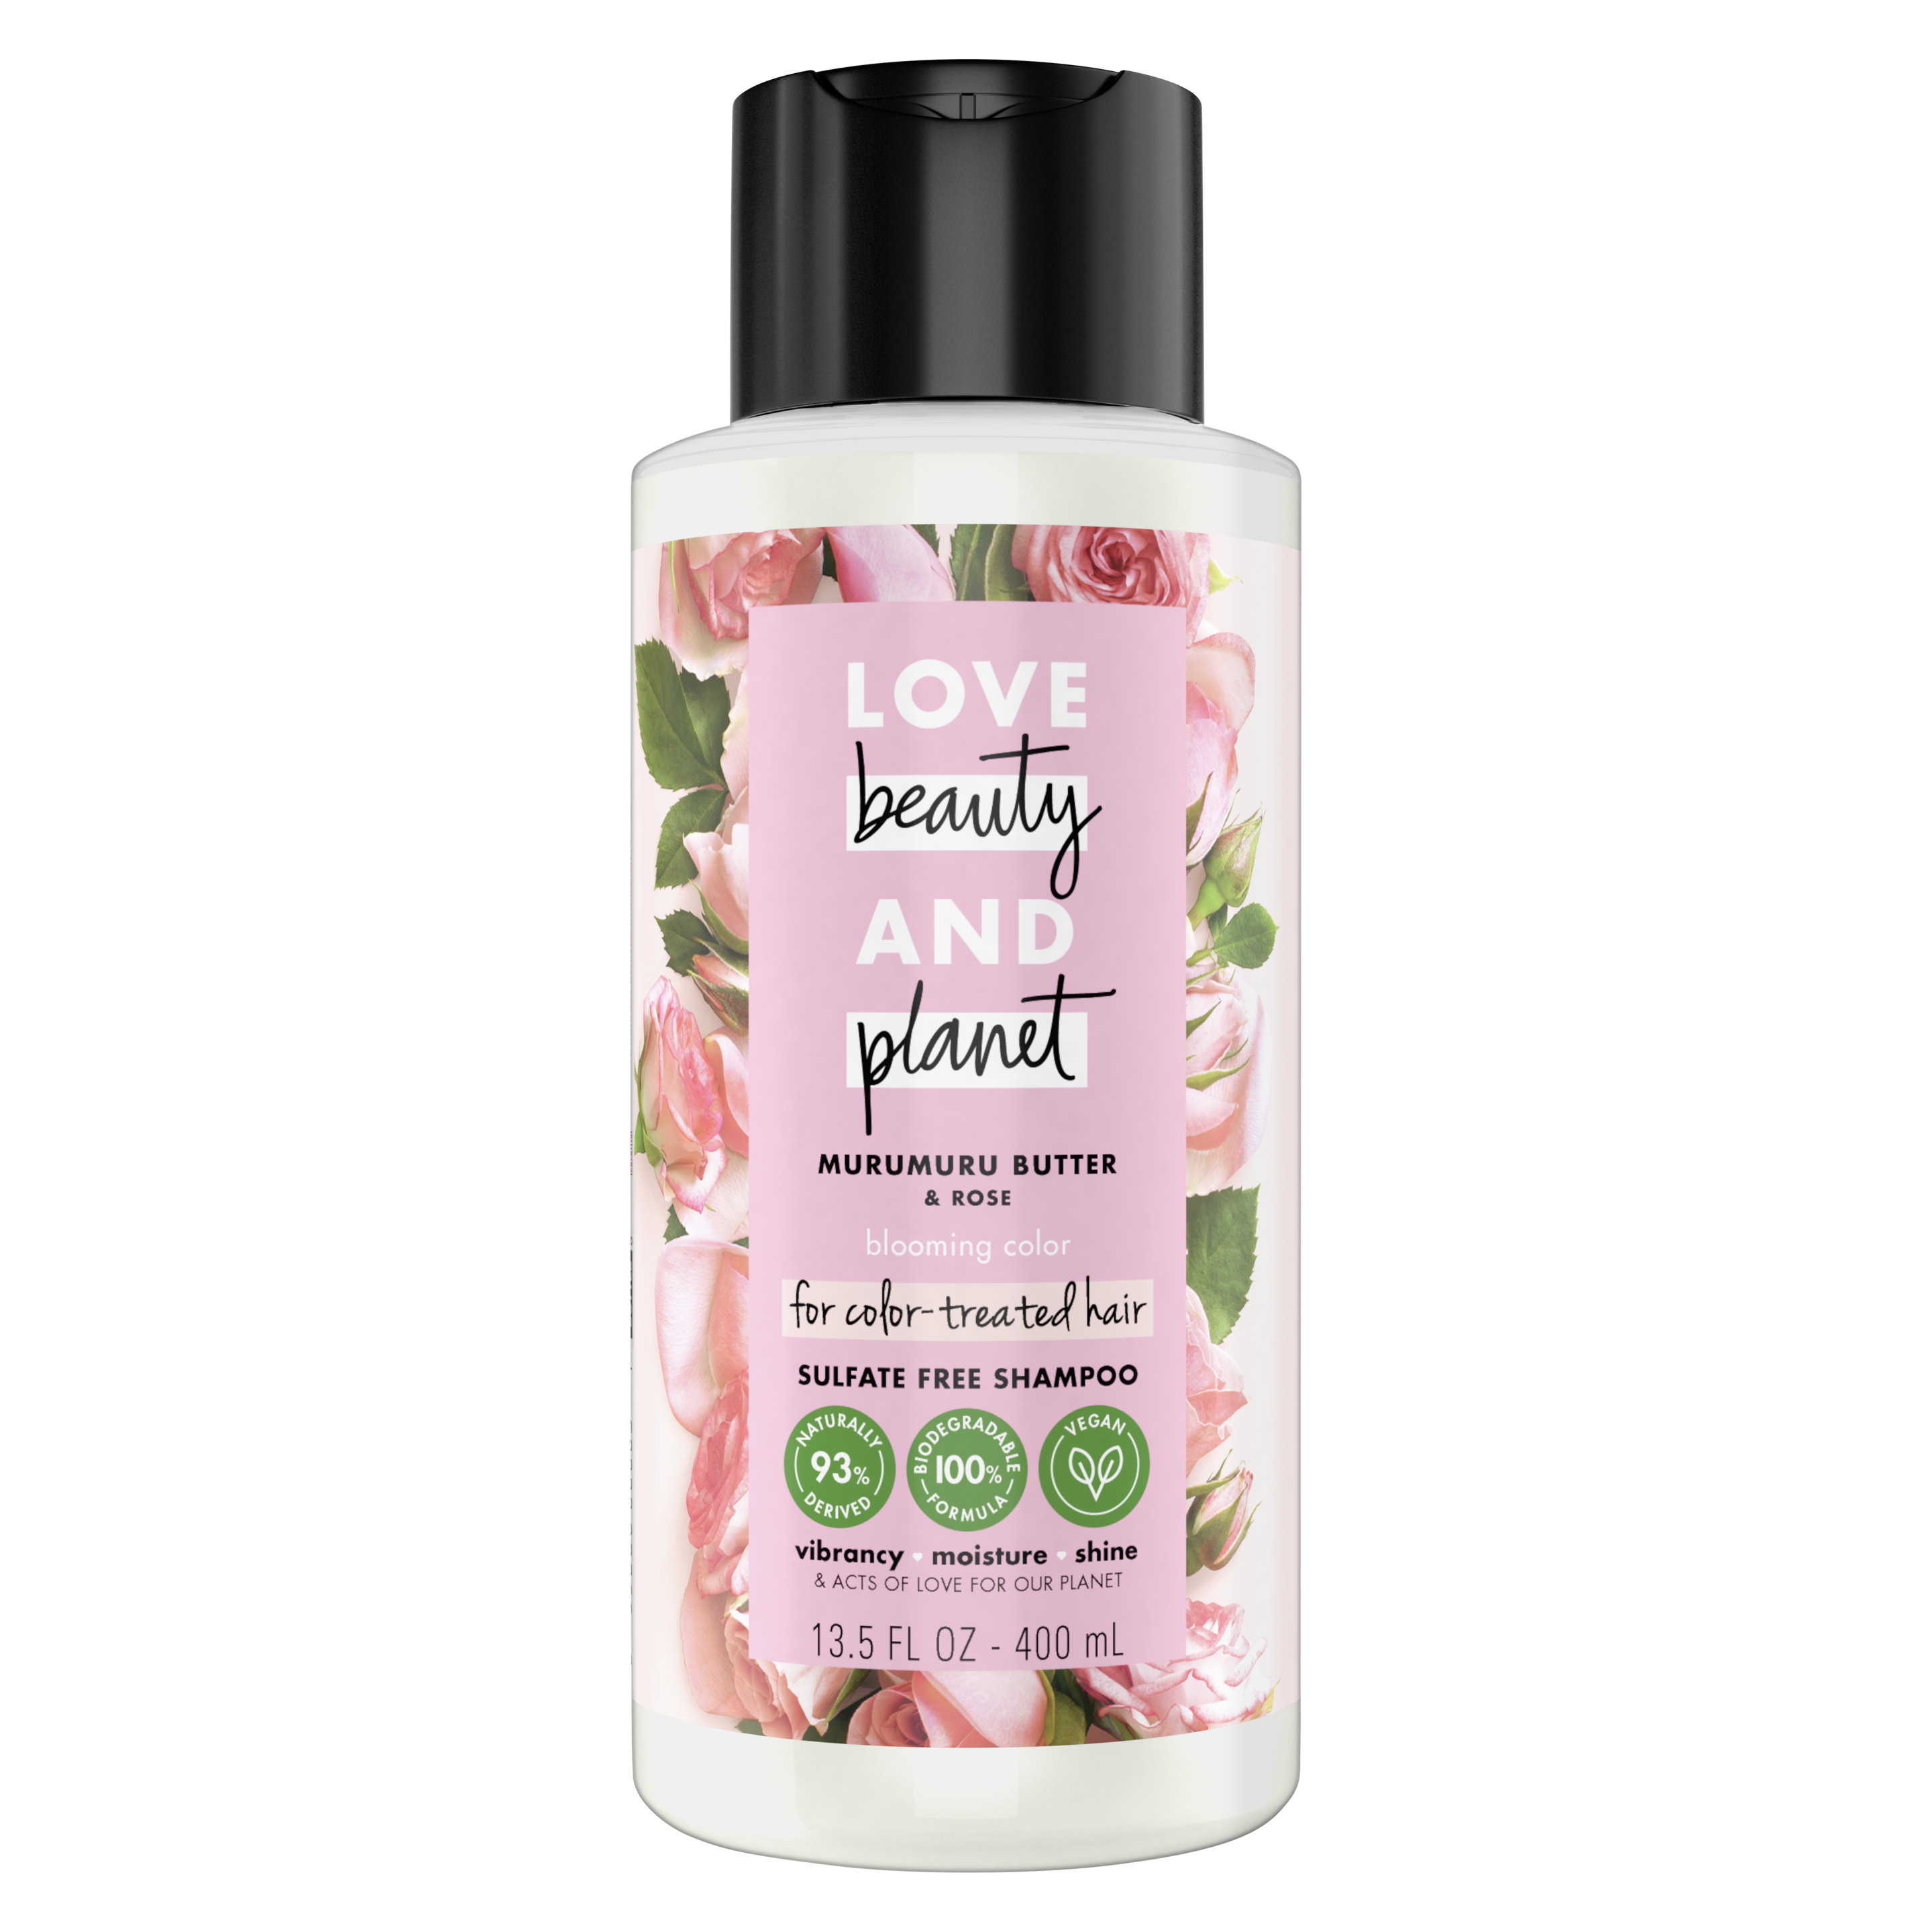 Front of shampoo pack Allure Best in Beauty 2018 Love Beauty Planet Murumuru Butter & Rose Oil Shampoo Blooming Color 13.5oz